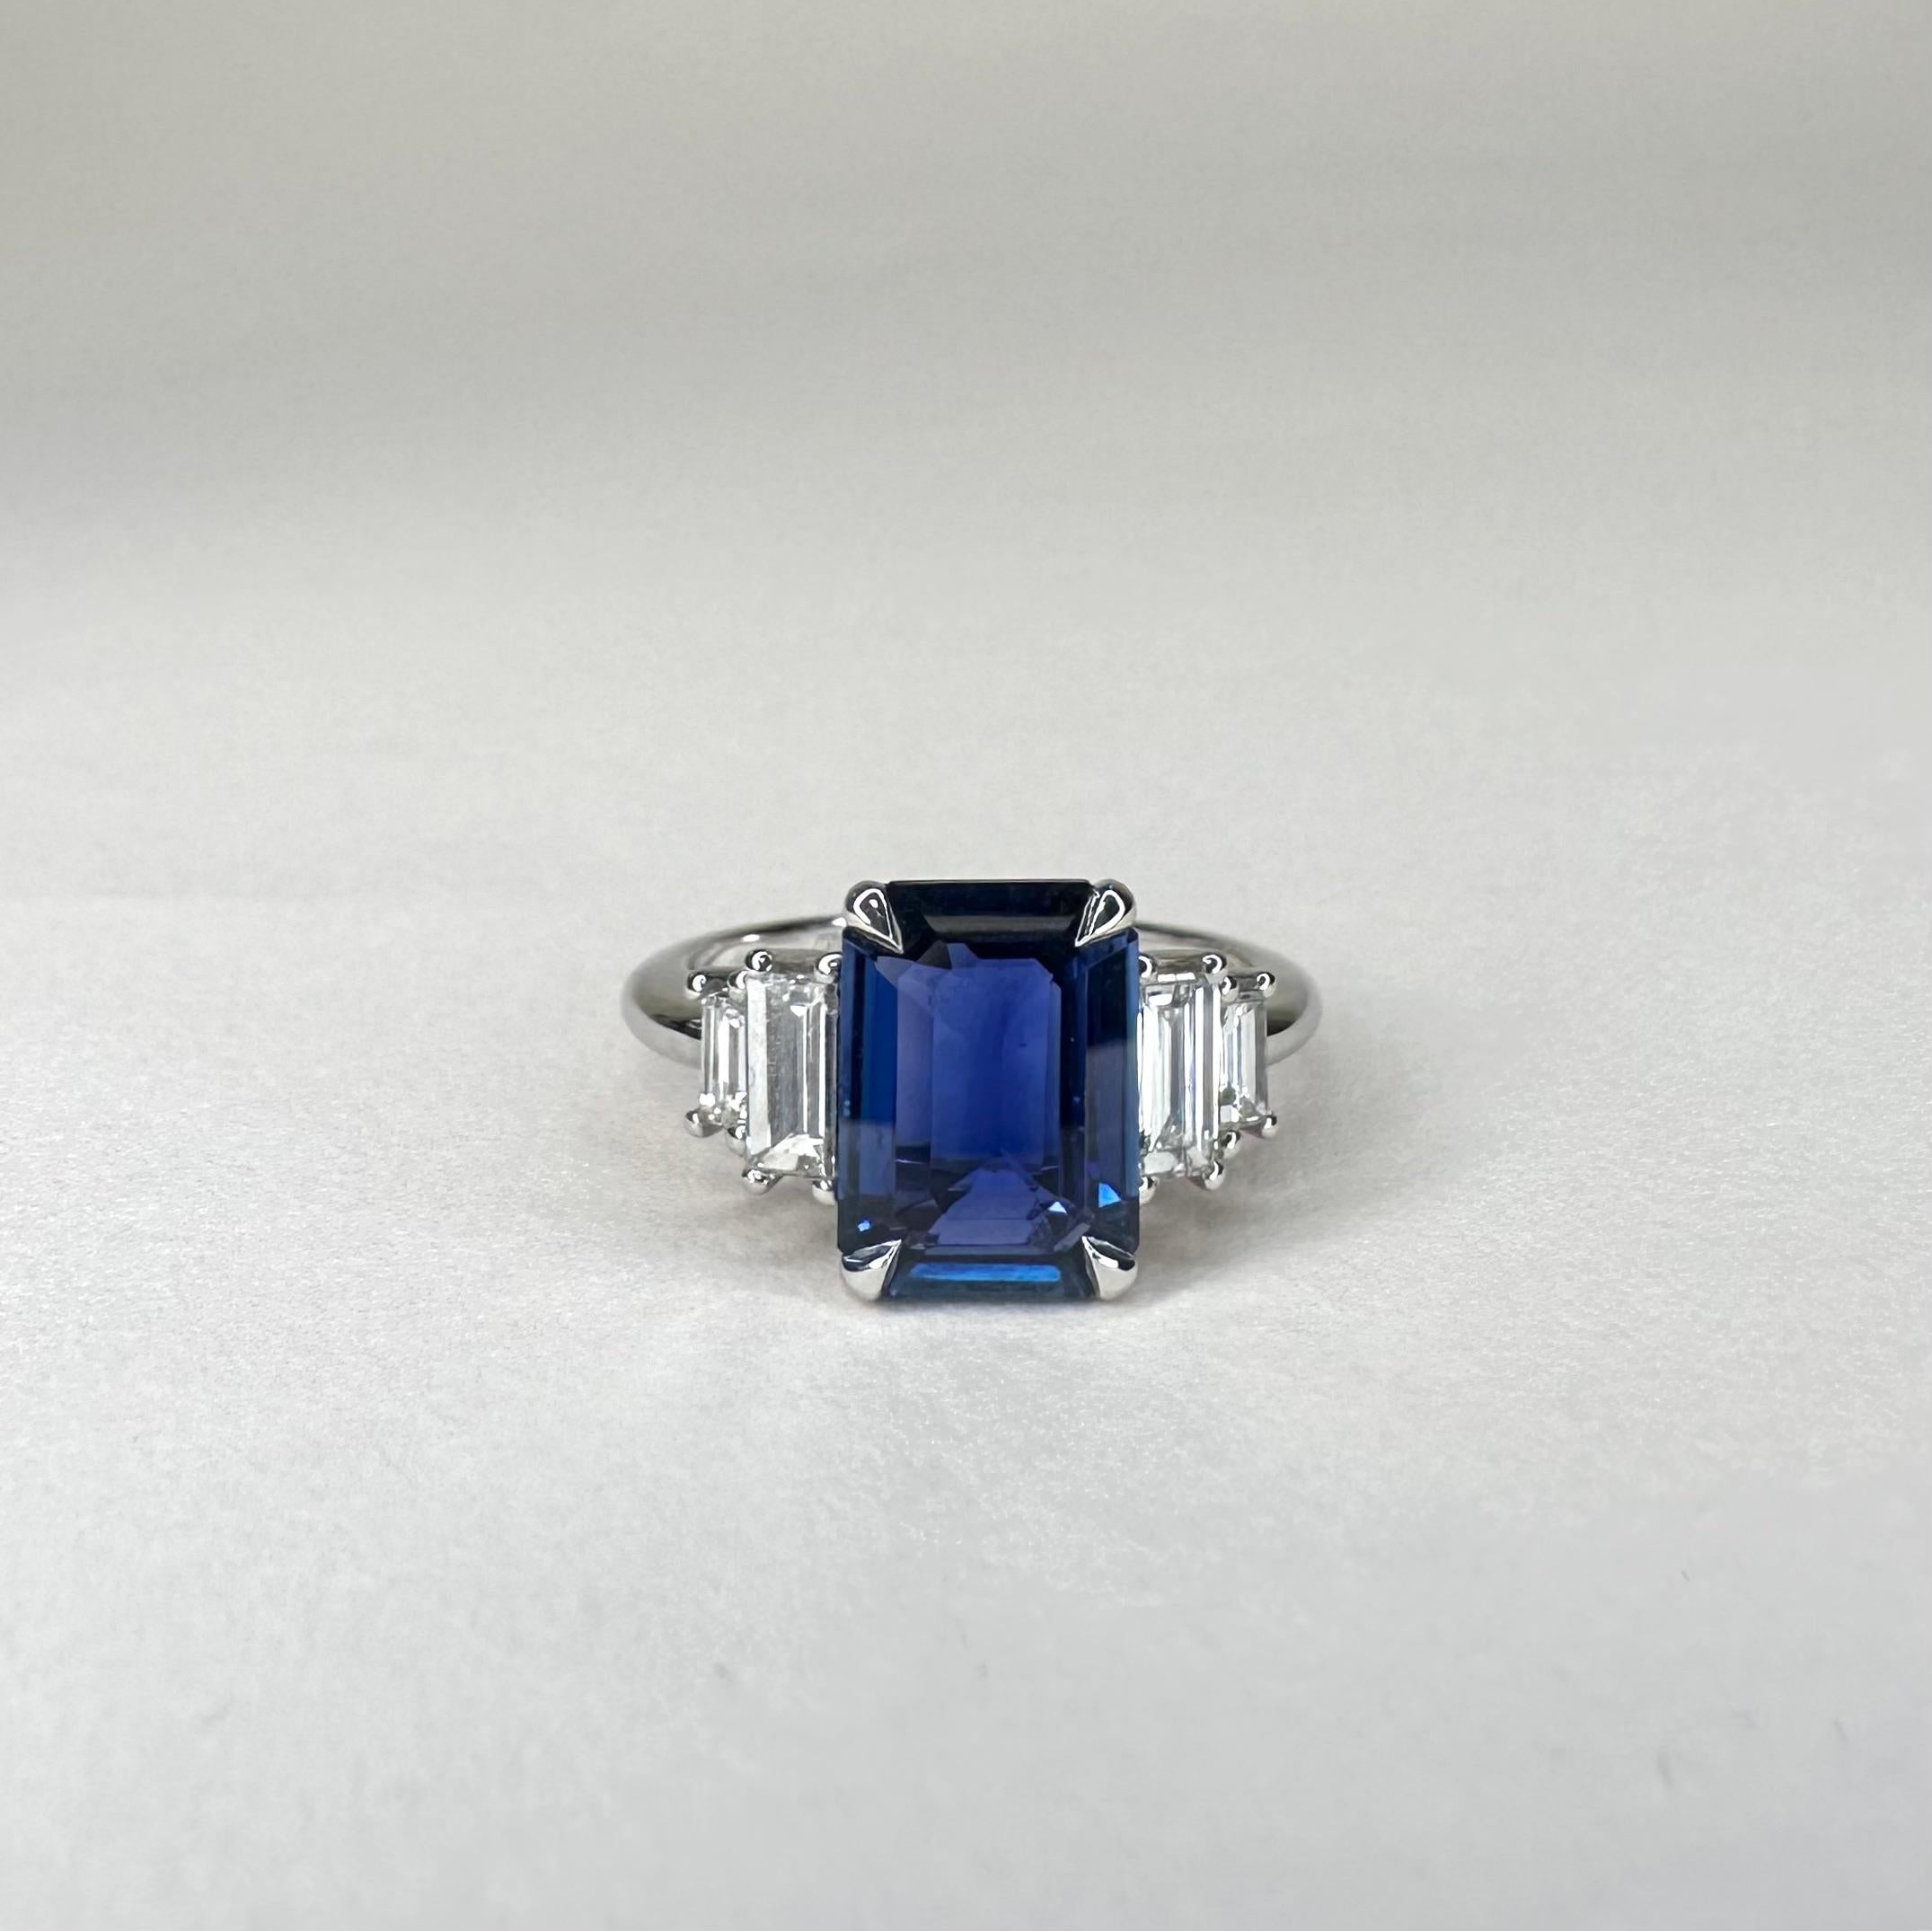 For Sale:  Art Deco Style 18k White Gold Ring With 2.65 Ct Royal Blue Emerald Cut Sapphire 2